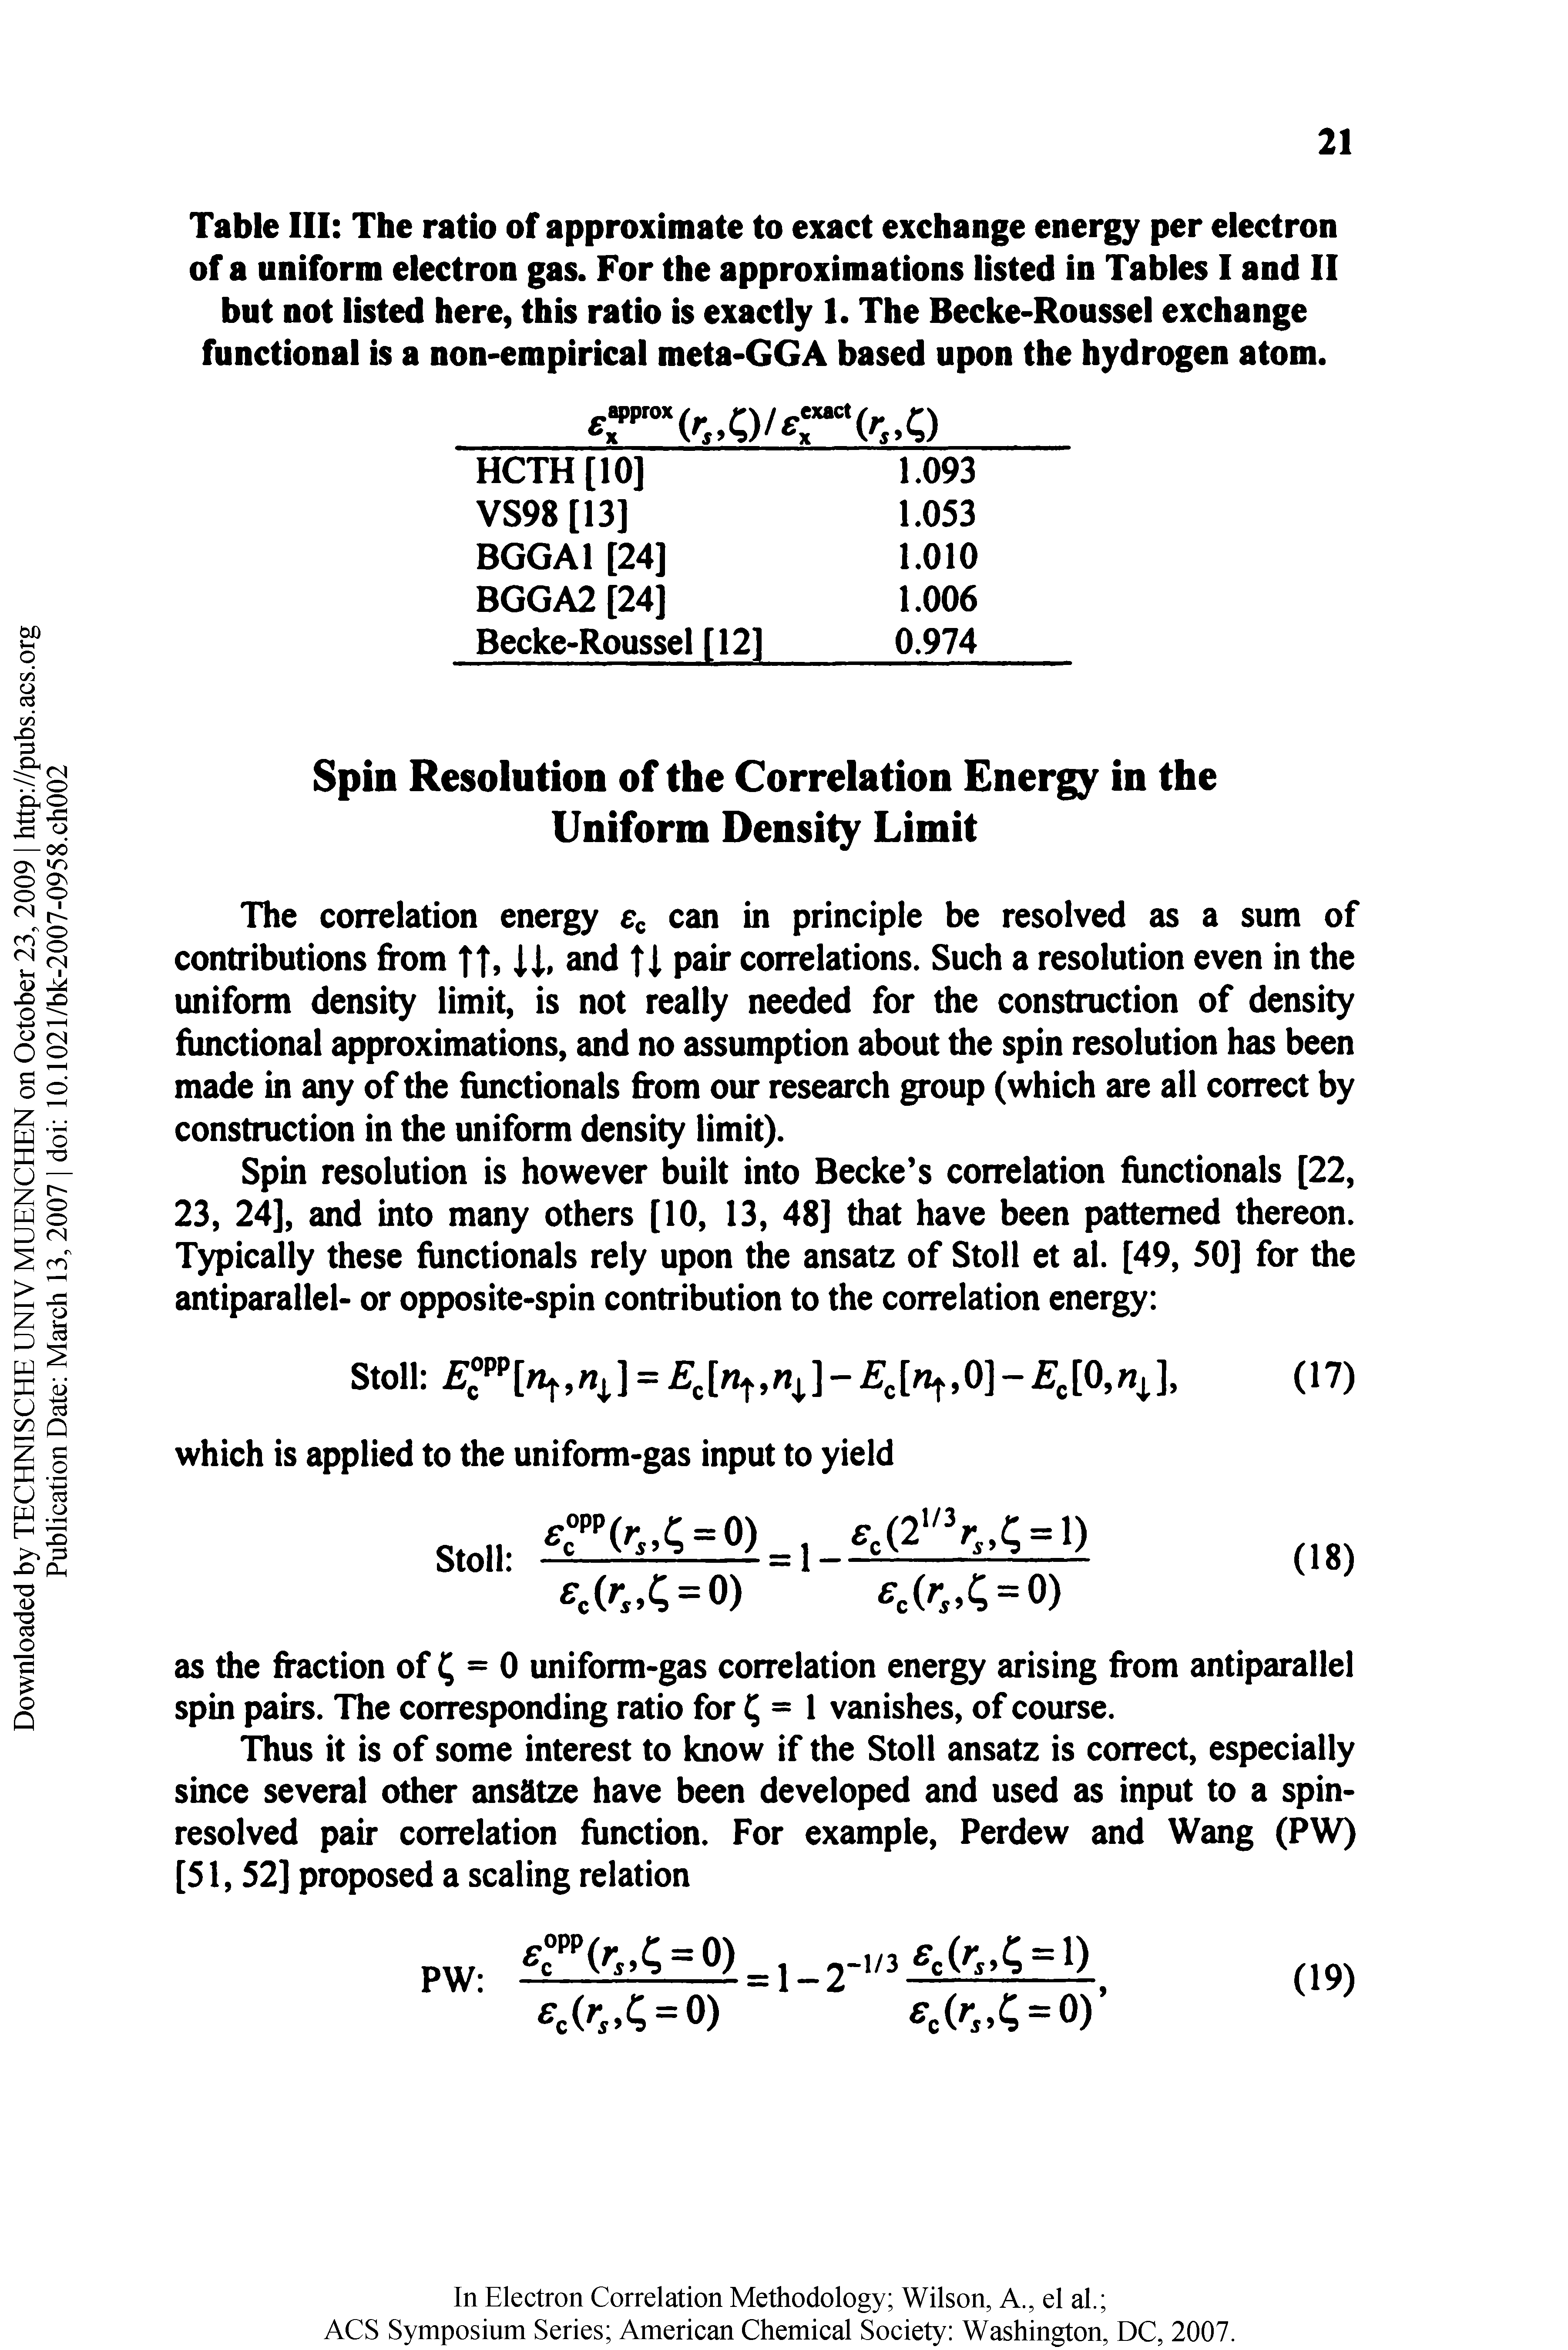 Table III The ratio of approximate to exact exchange energy per electron of a uniform electron gas. For the approximations listed in Tables I and II but not listed here, this ratio is exactly 1. The Becke-Roussel exchange functional is a non-empirical meta-GGA based upon the hydrogen atom.